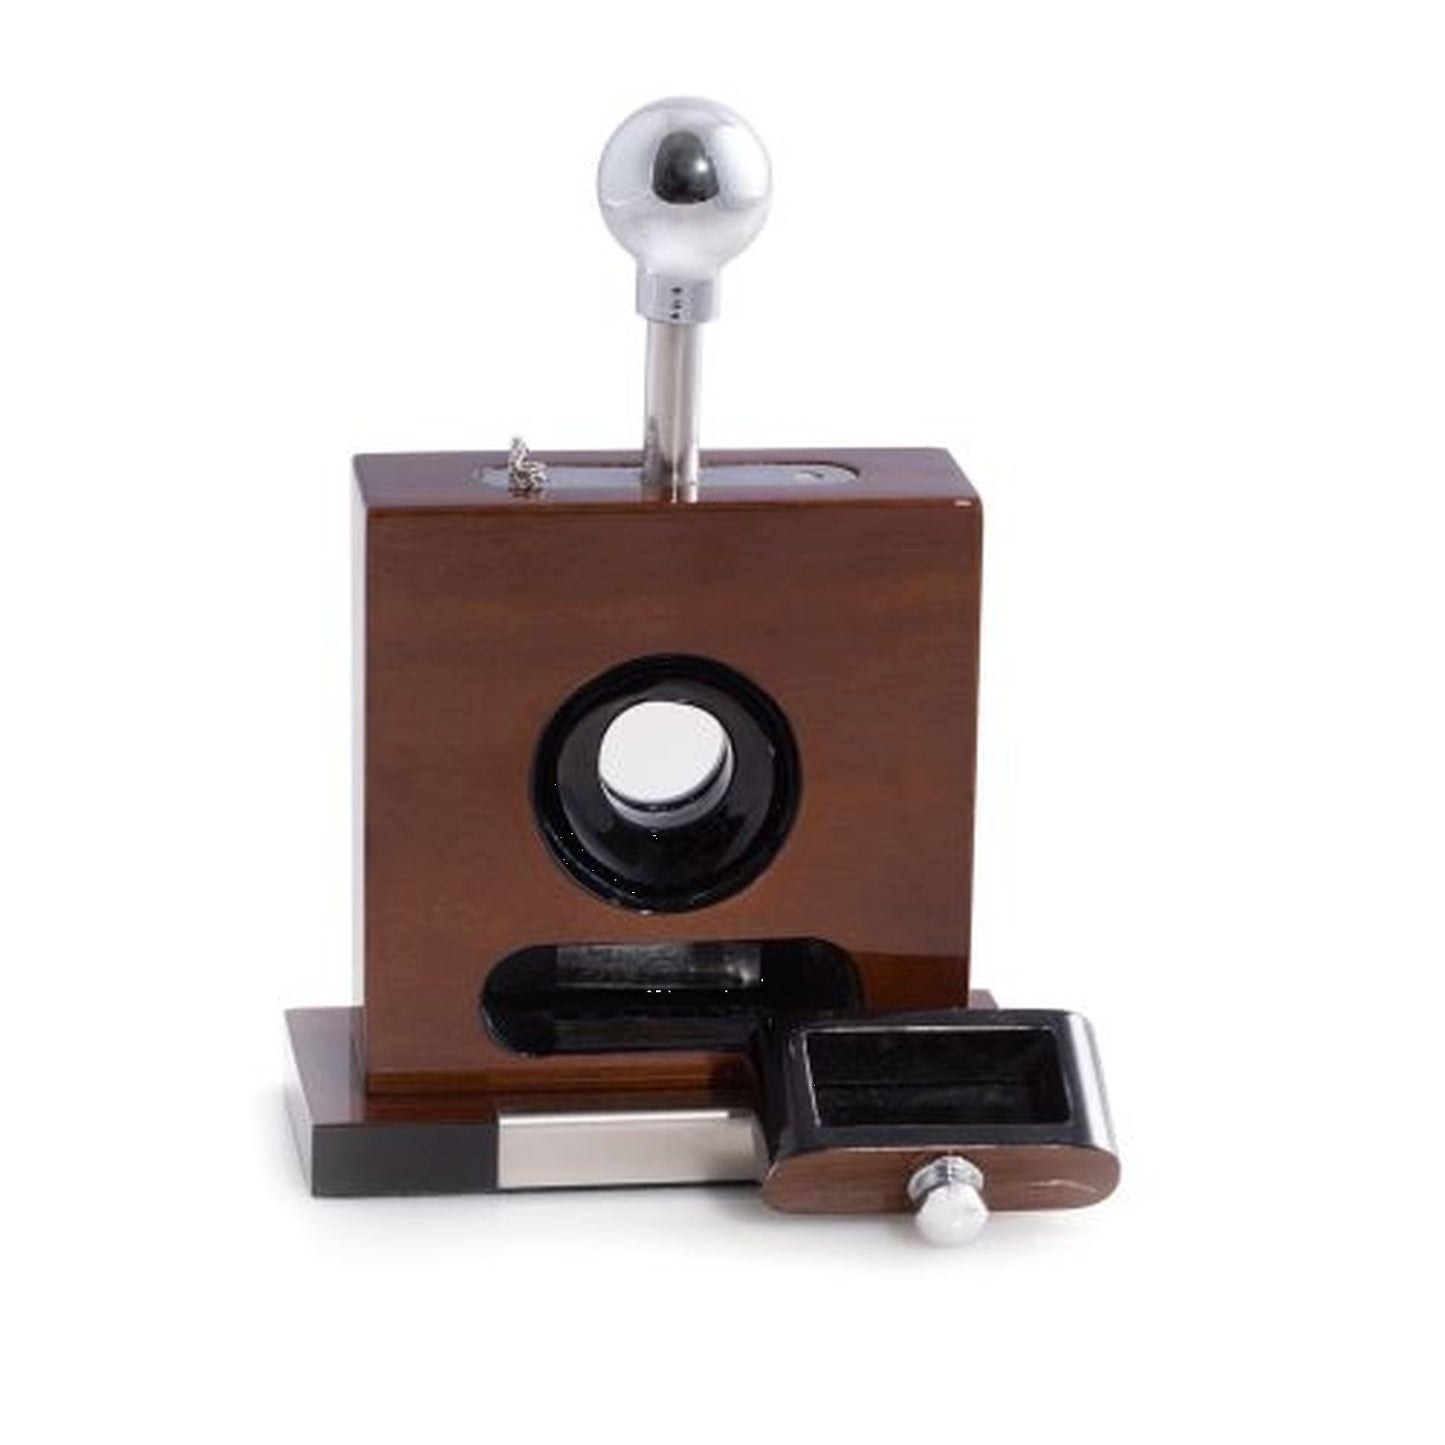 "Walnut" Wood & Stainless Steel Table Top Cigar Cutter